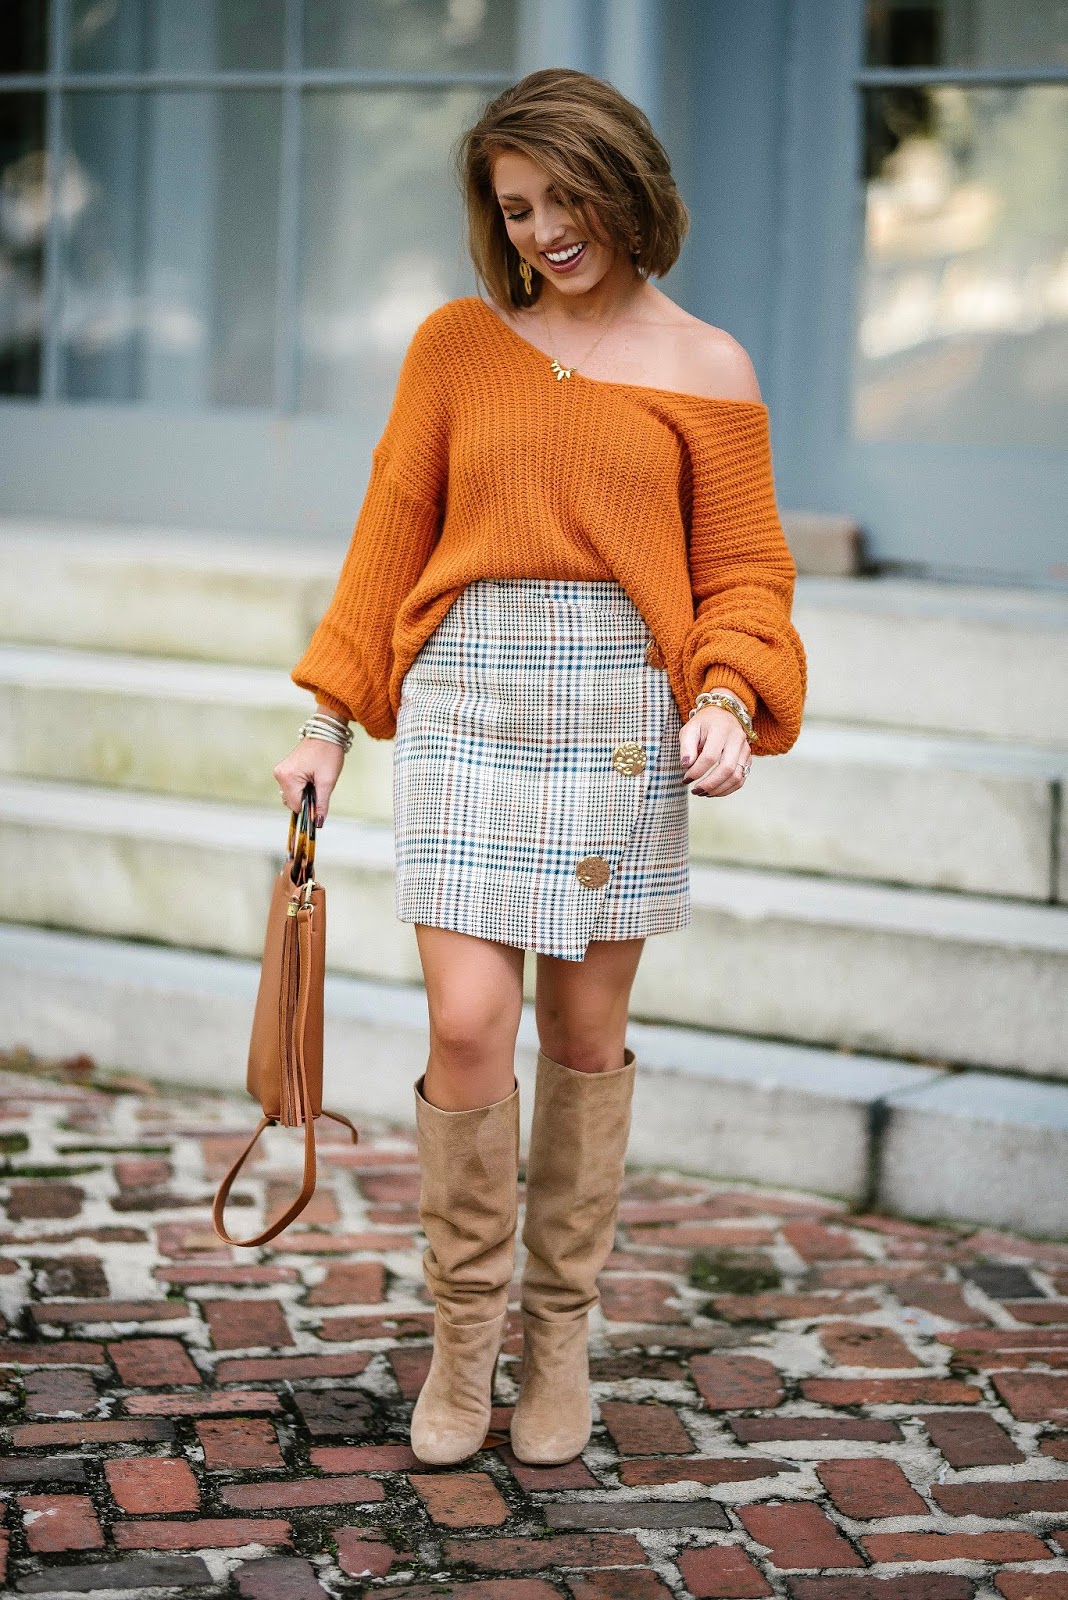 Under $60 Plaid Faux-Wrap Skirt for Fall + Slouchy Orange Sweater - Something Delightful Blog